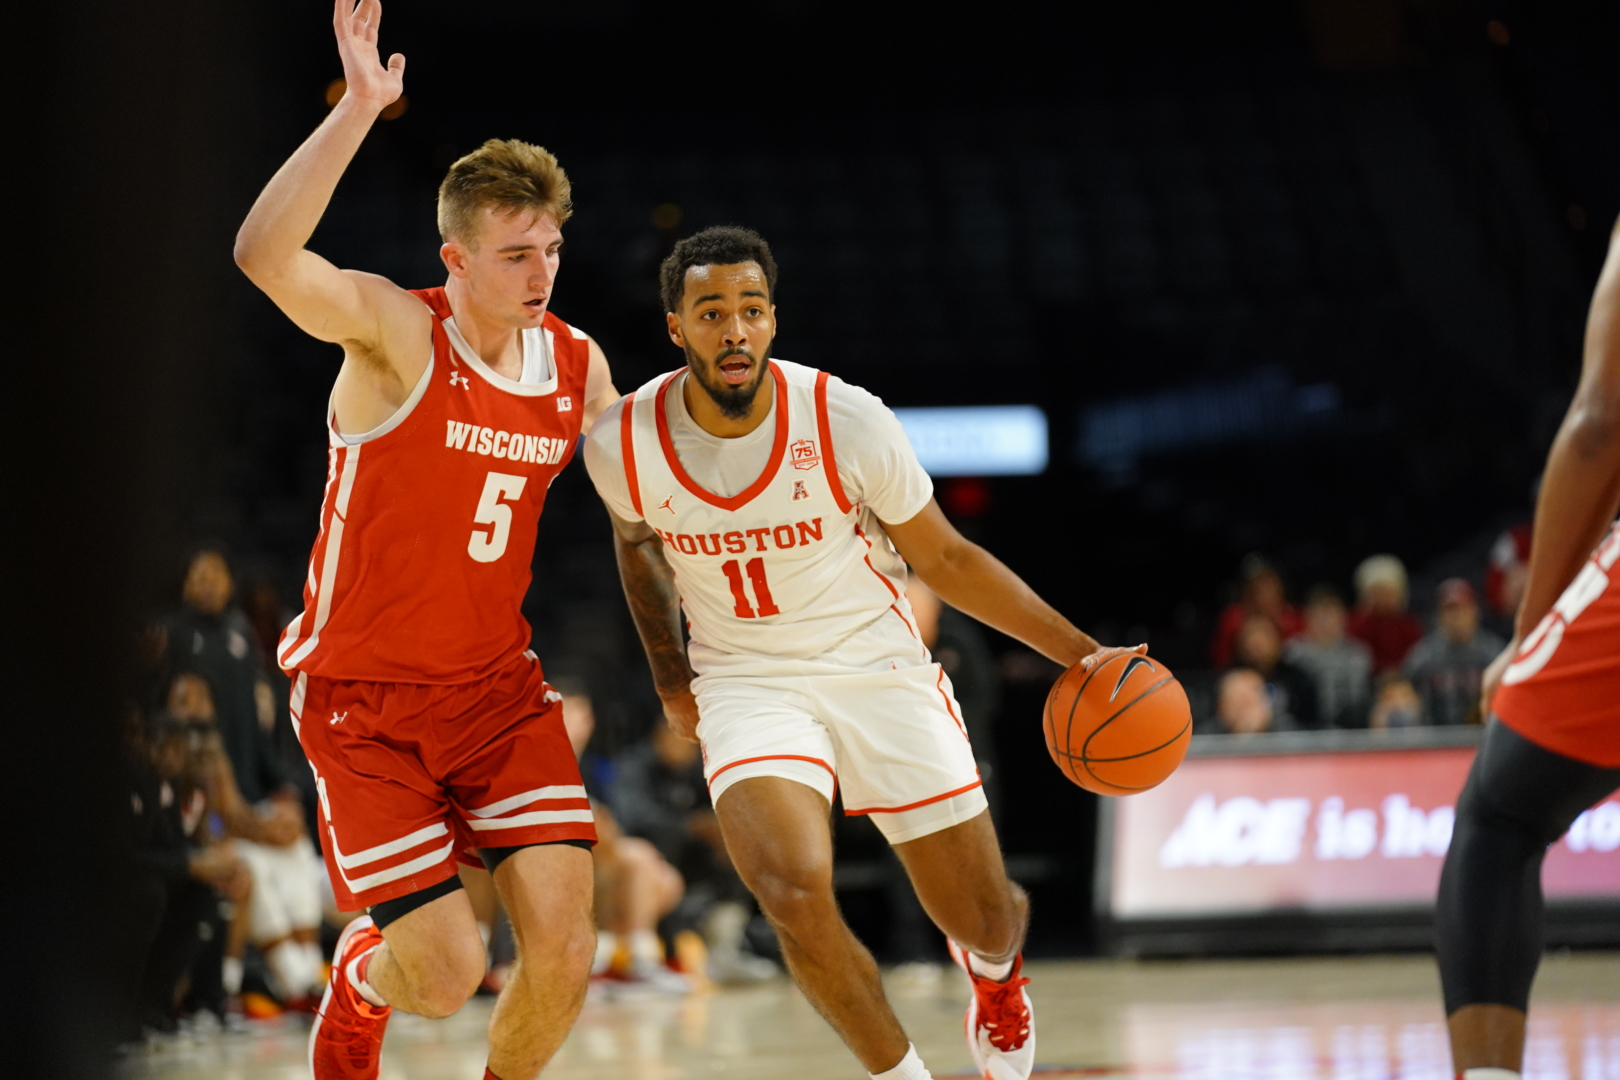 UH guard Kyler Edwards scored a team-high 18 points in the Cougars' loss to Wisconsin on Tuesday . | Courtesy of UH athletics